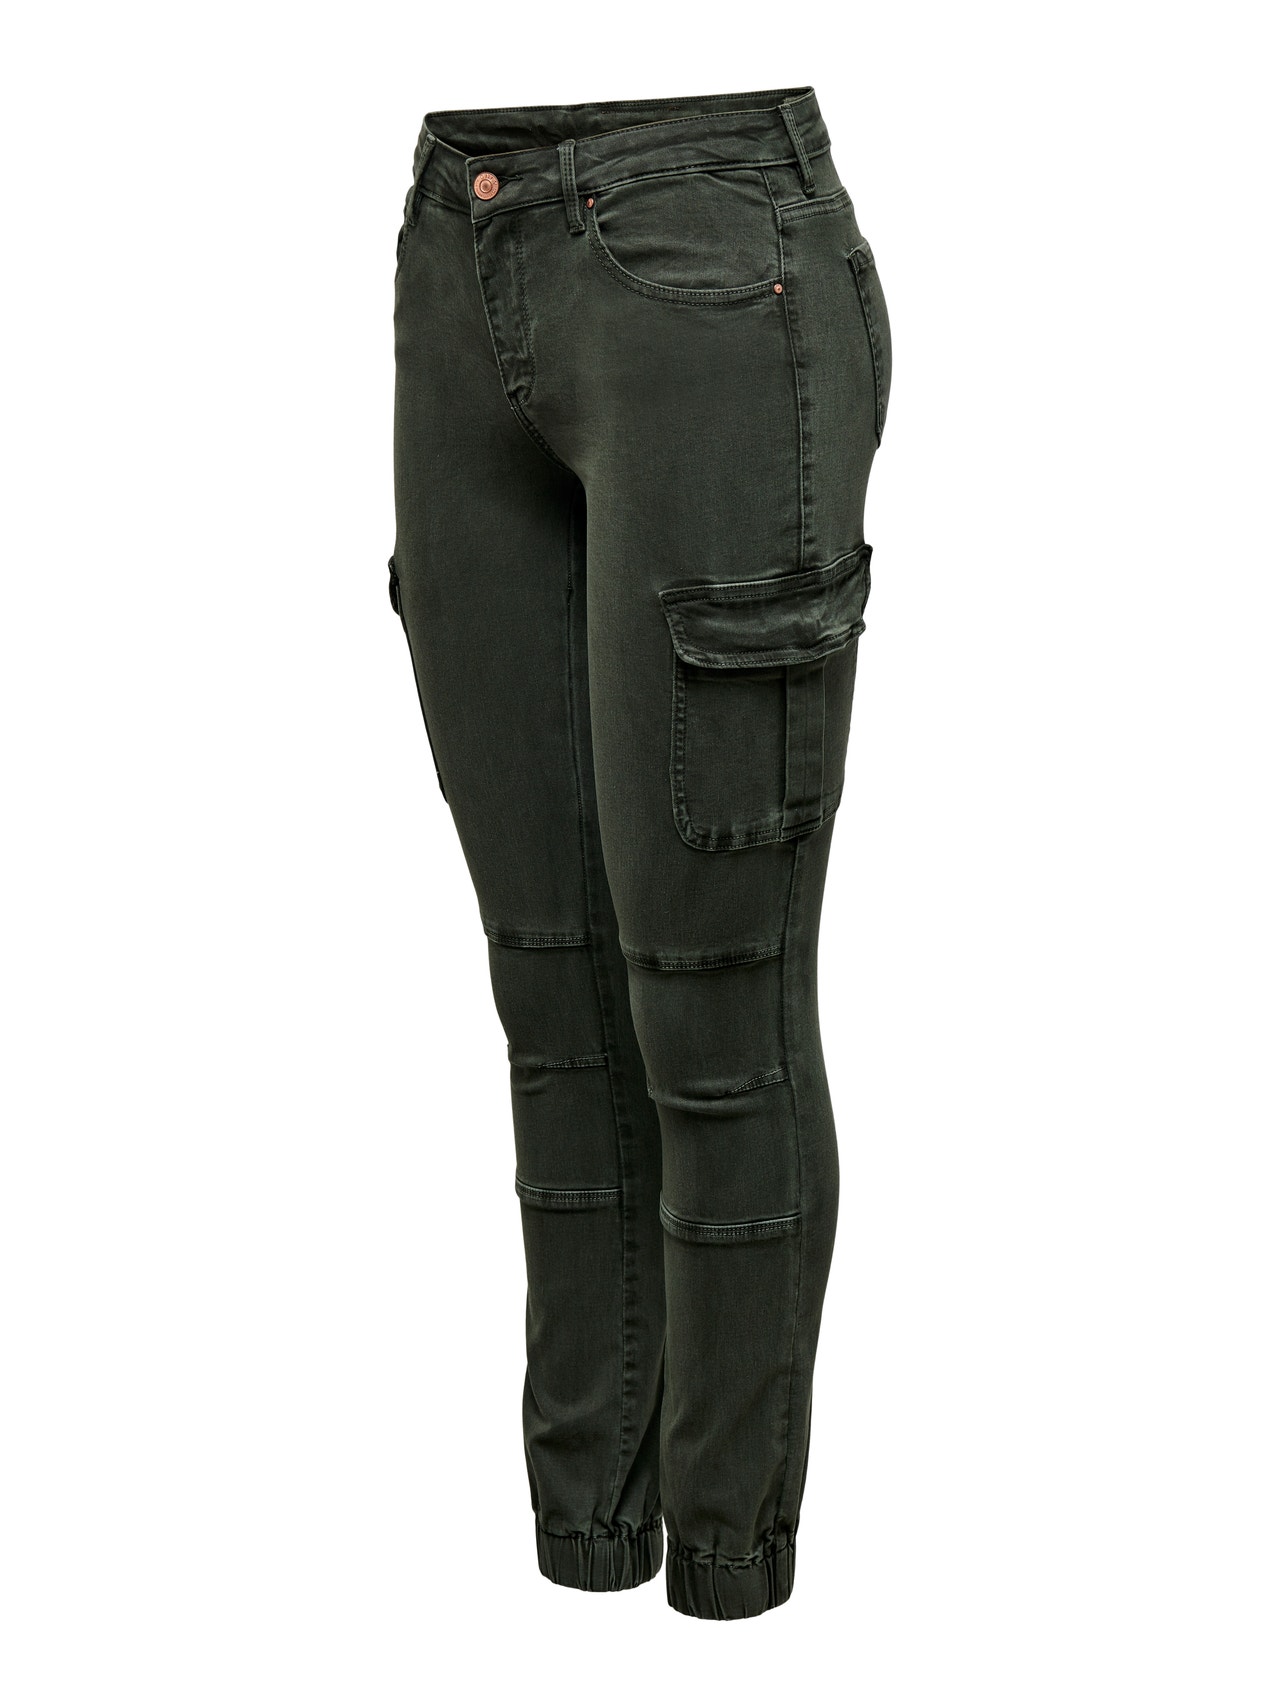 ONLY Slim Fit Mid waist Elasticated hems Trousers -Rosin - 15170889